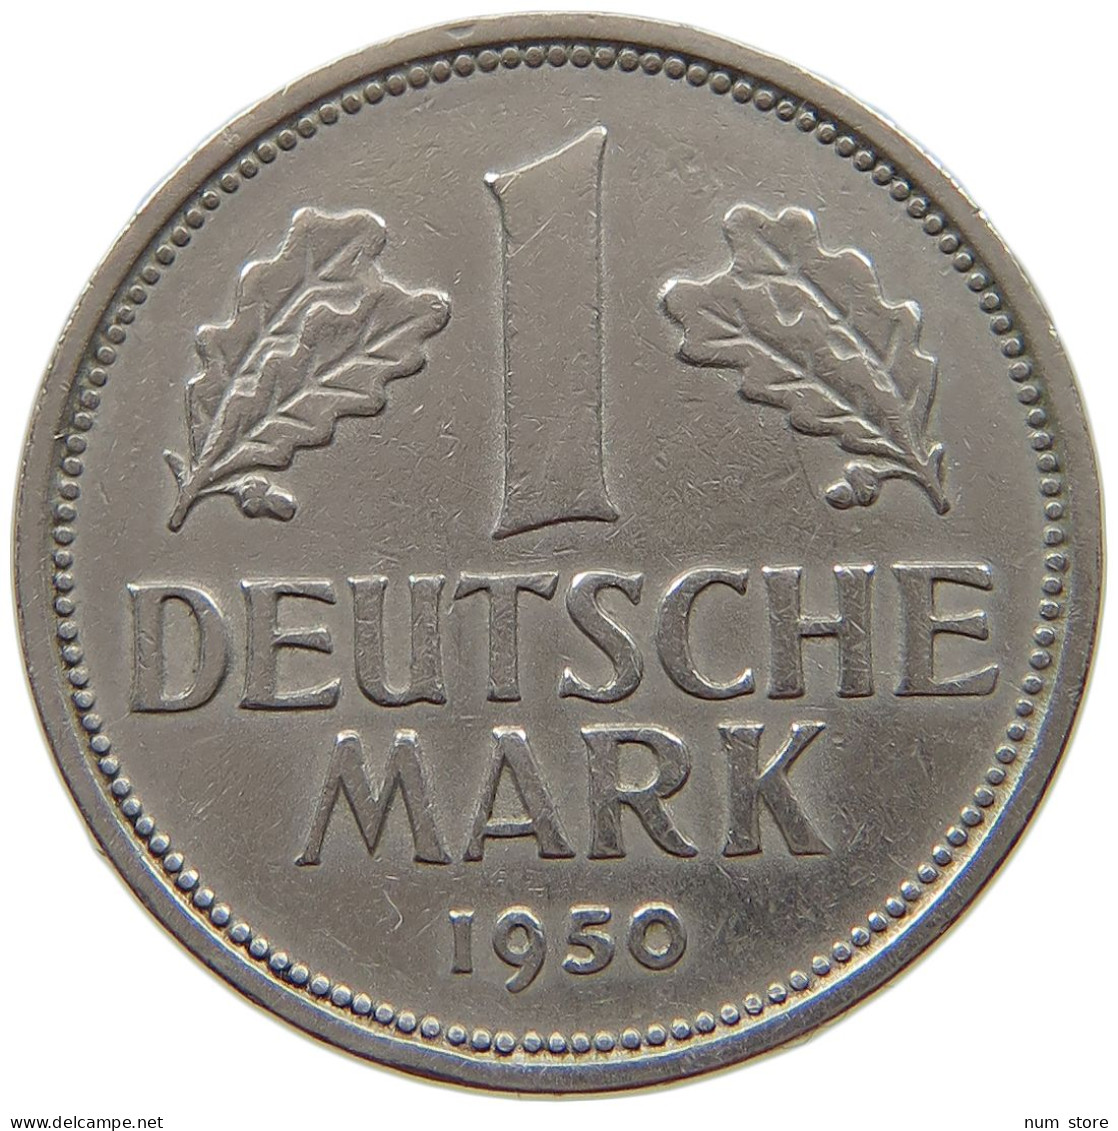 GERMANY WEST 1 MARK 1950 F #a043 0485 - 1 Marco